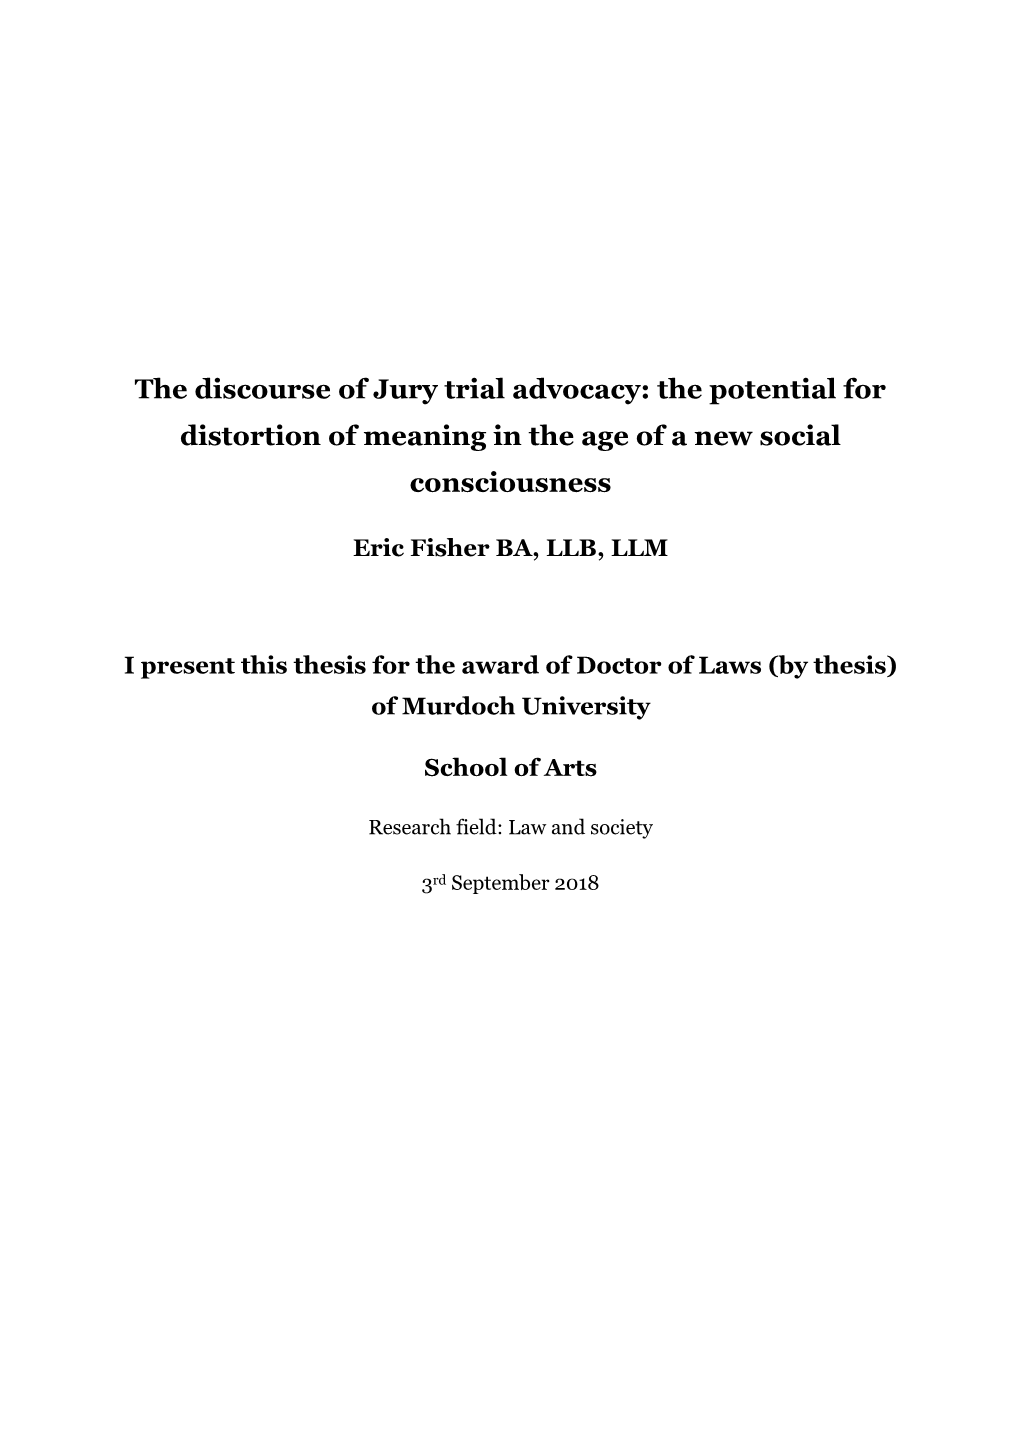 The Discourse of Jury Trial Advocacy: the Potential for Distortion of Meaning in the Age of a New Social Consciousness